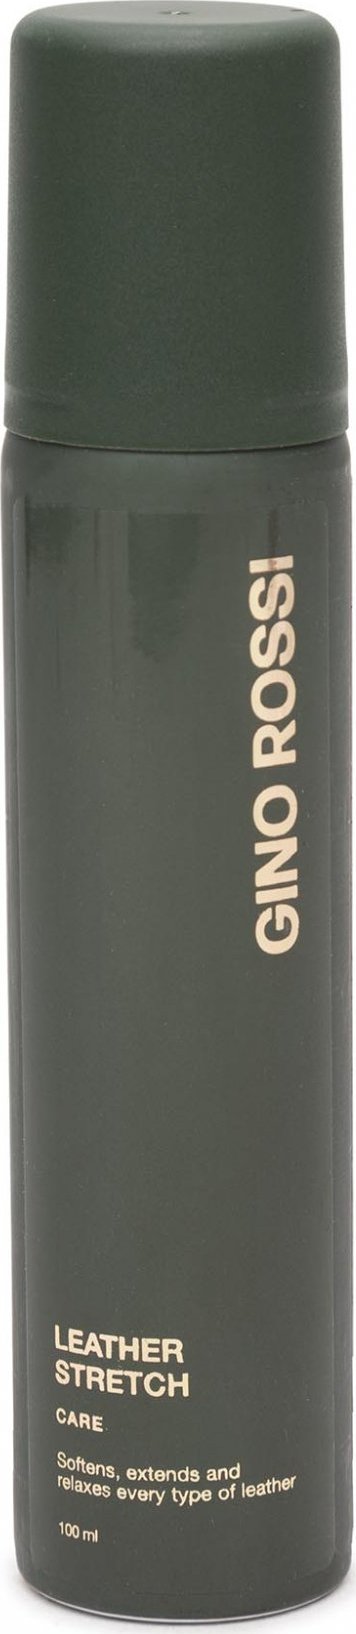 Gino Rossi Leather Stretch N610-E0C2-400Y-ACQD